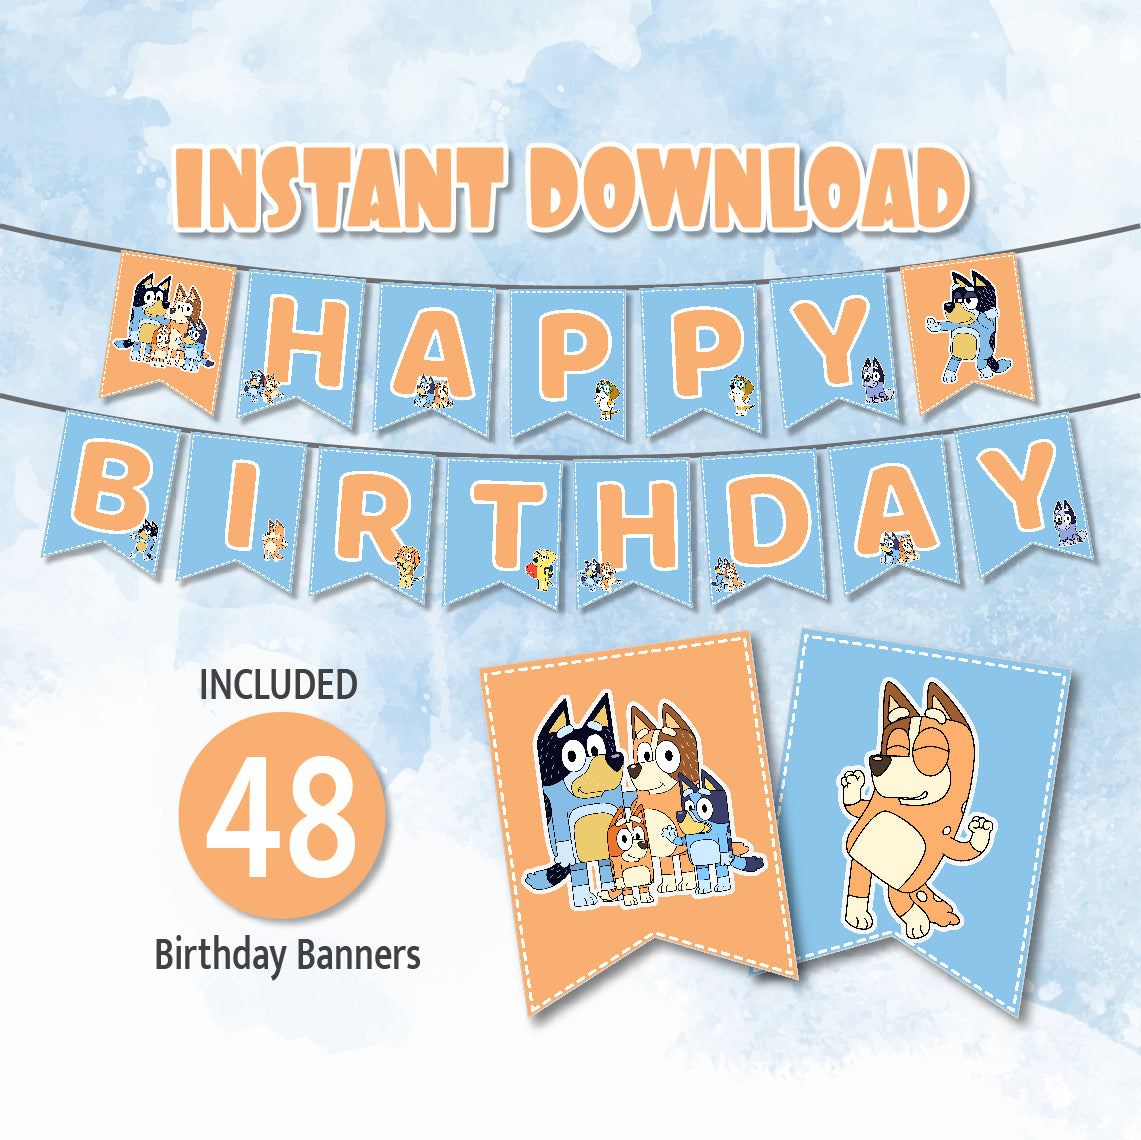 Happy Birthday Bluey Banners, Banners Printable, Bluey Party Decorations, Bluey Birthday Flags Instant